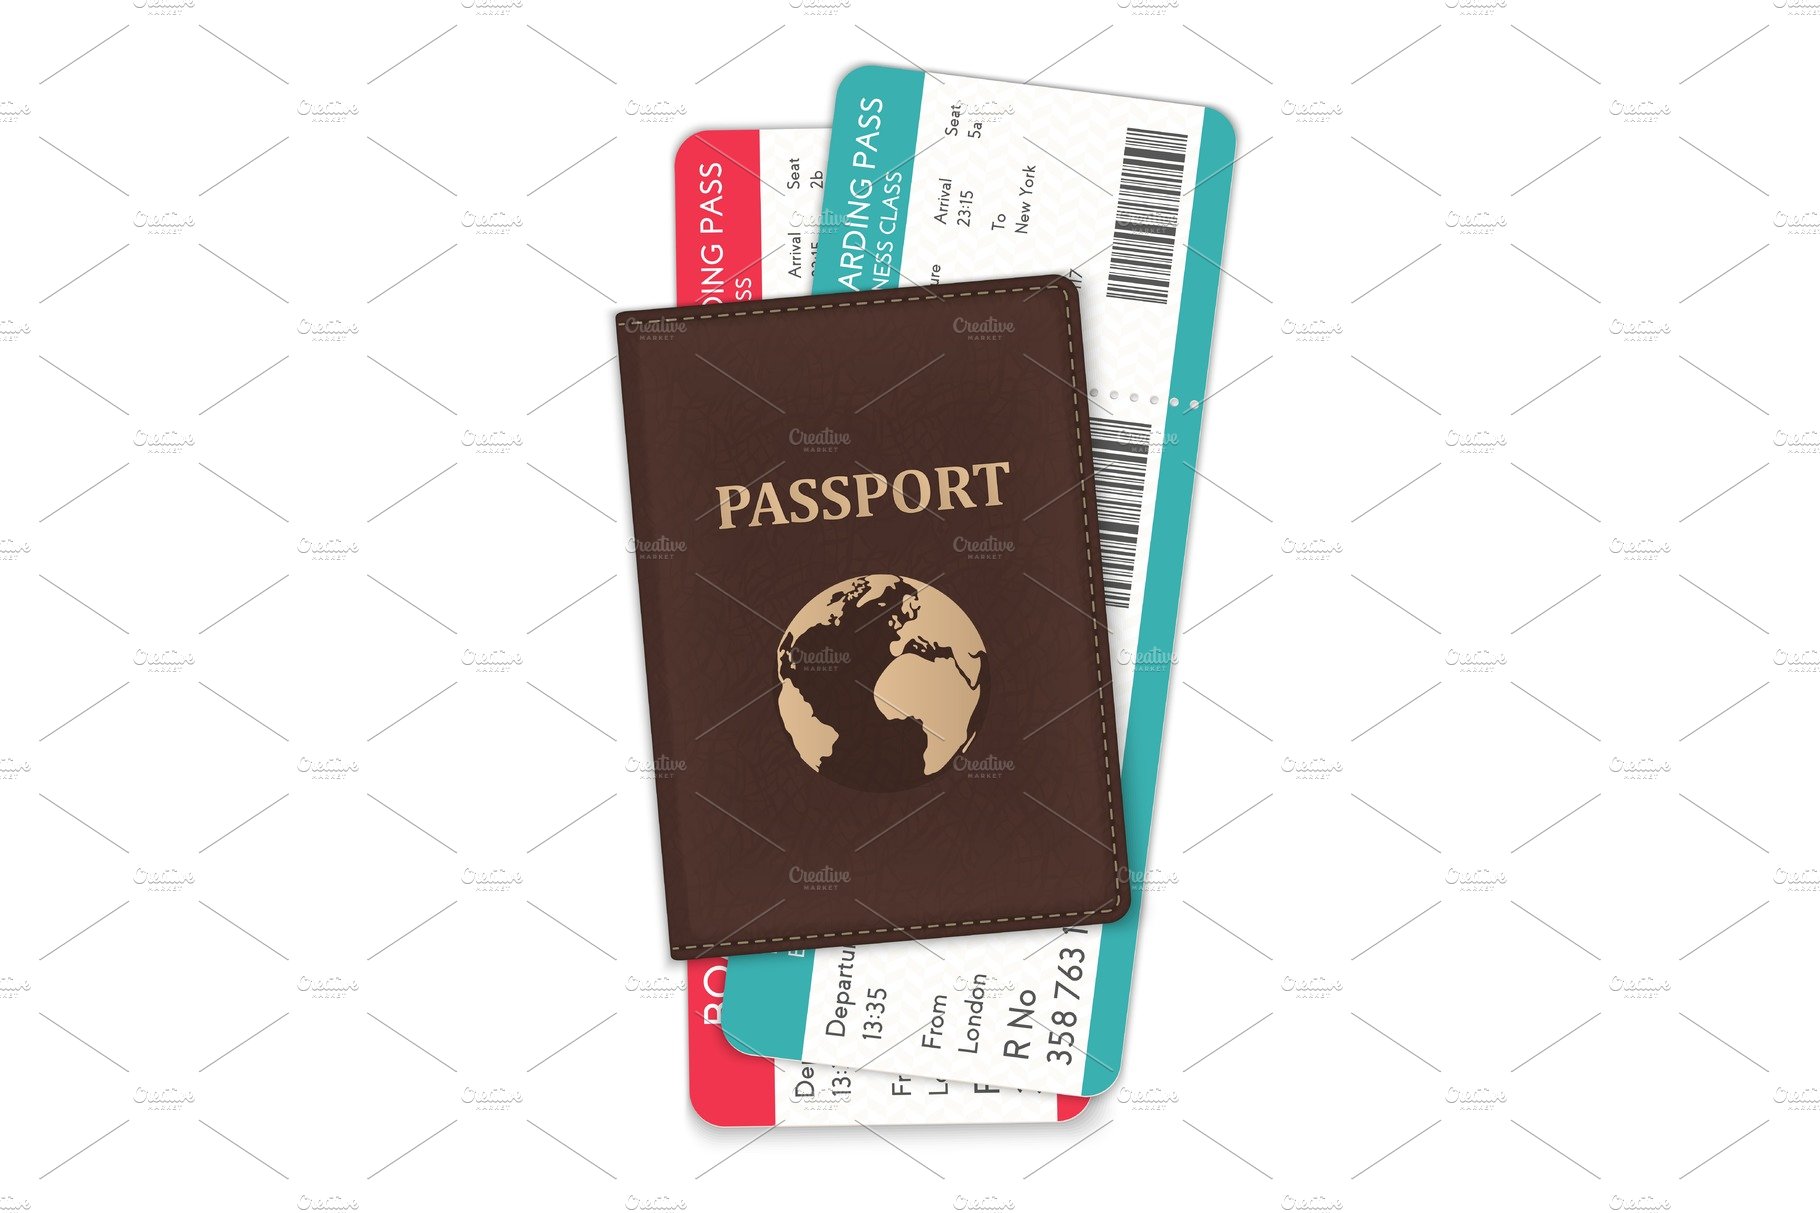 Passport with boarding passes. cover image.